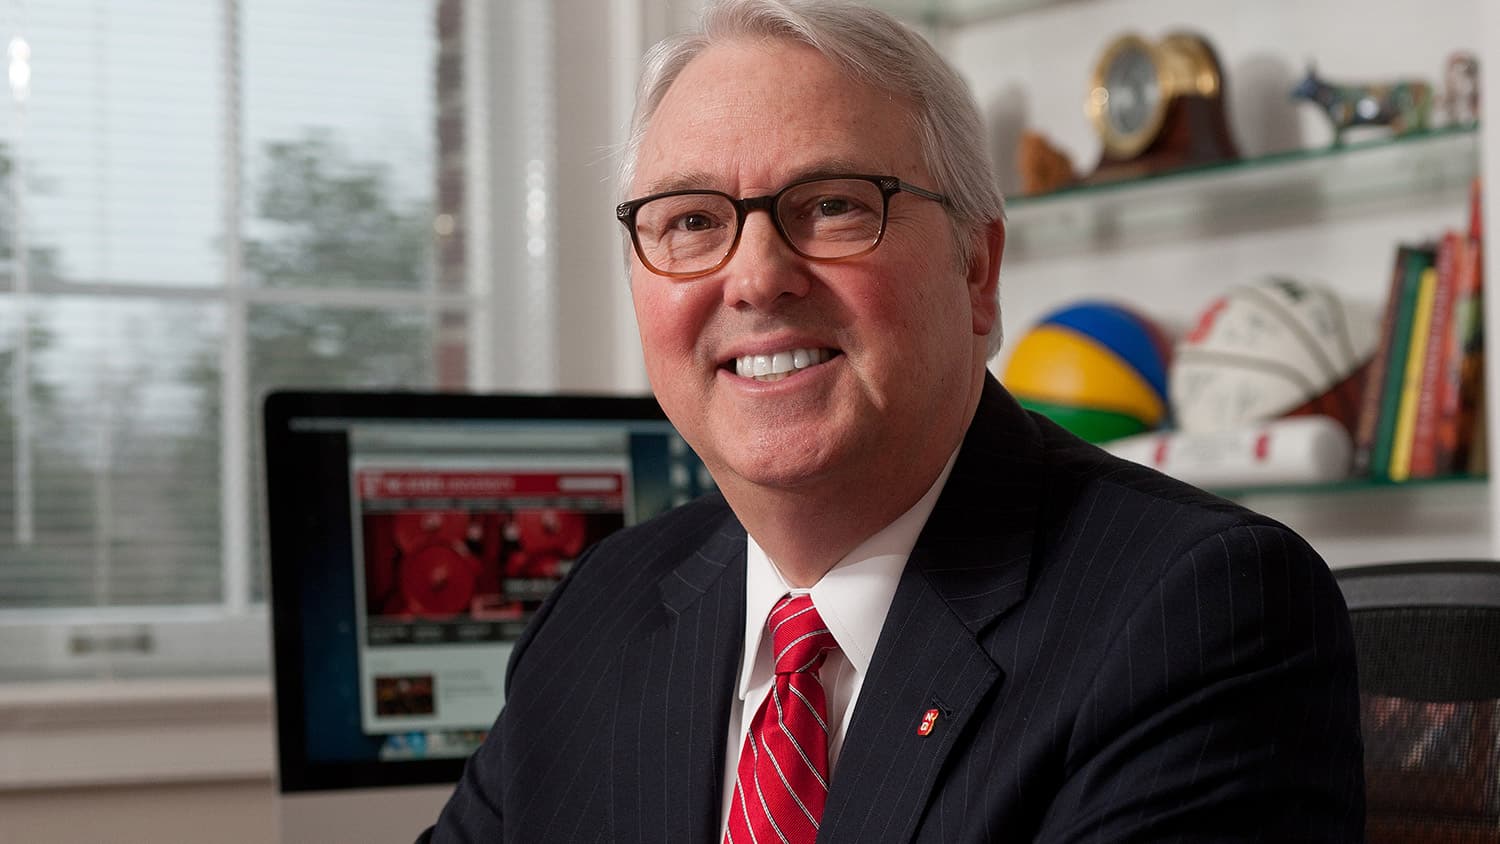 NC State Chancellor Woodson at his desk in Holladay Hall.